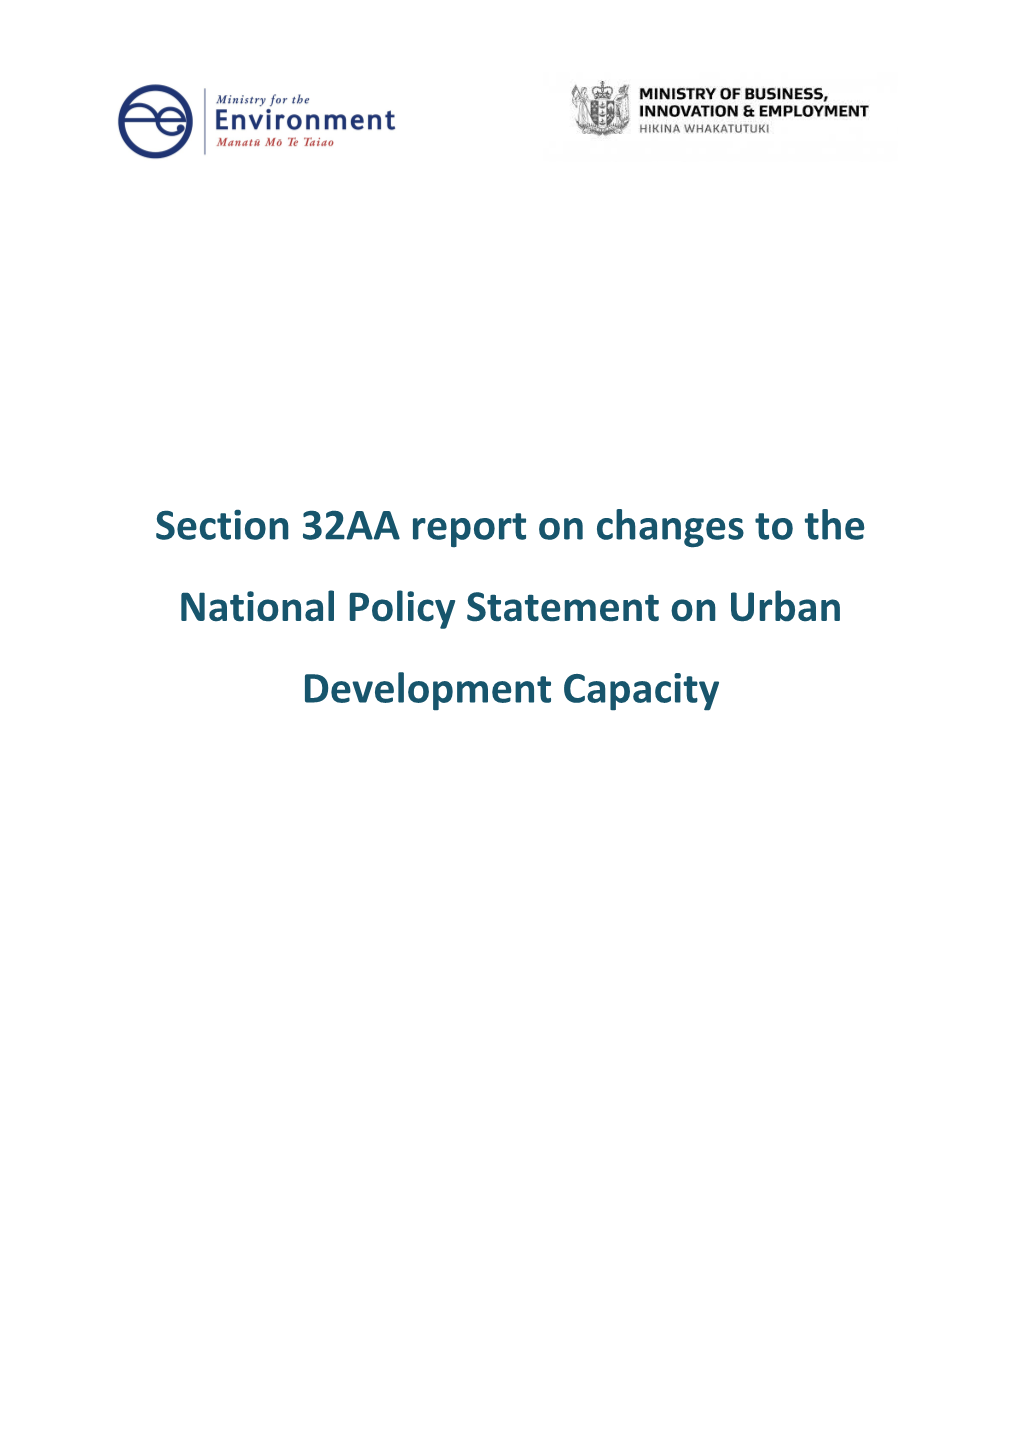 Section 32AA Report on Changes to the National Policy Statement on Urban Development Capacity